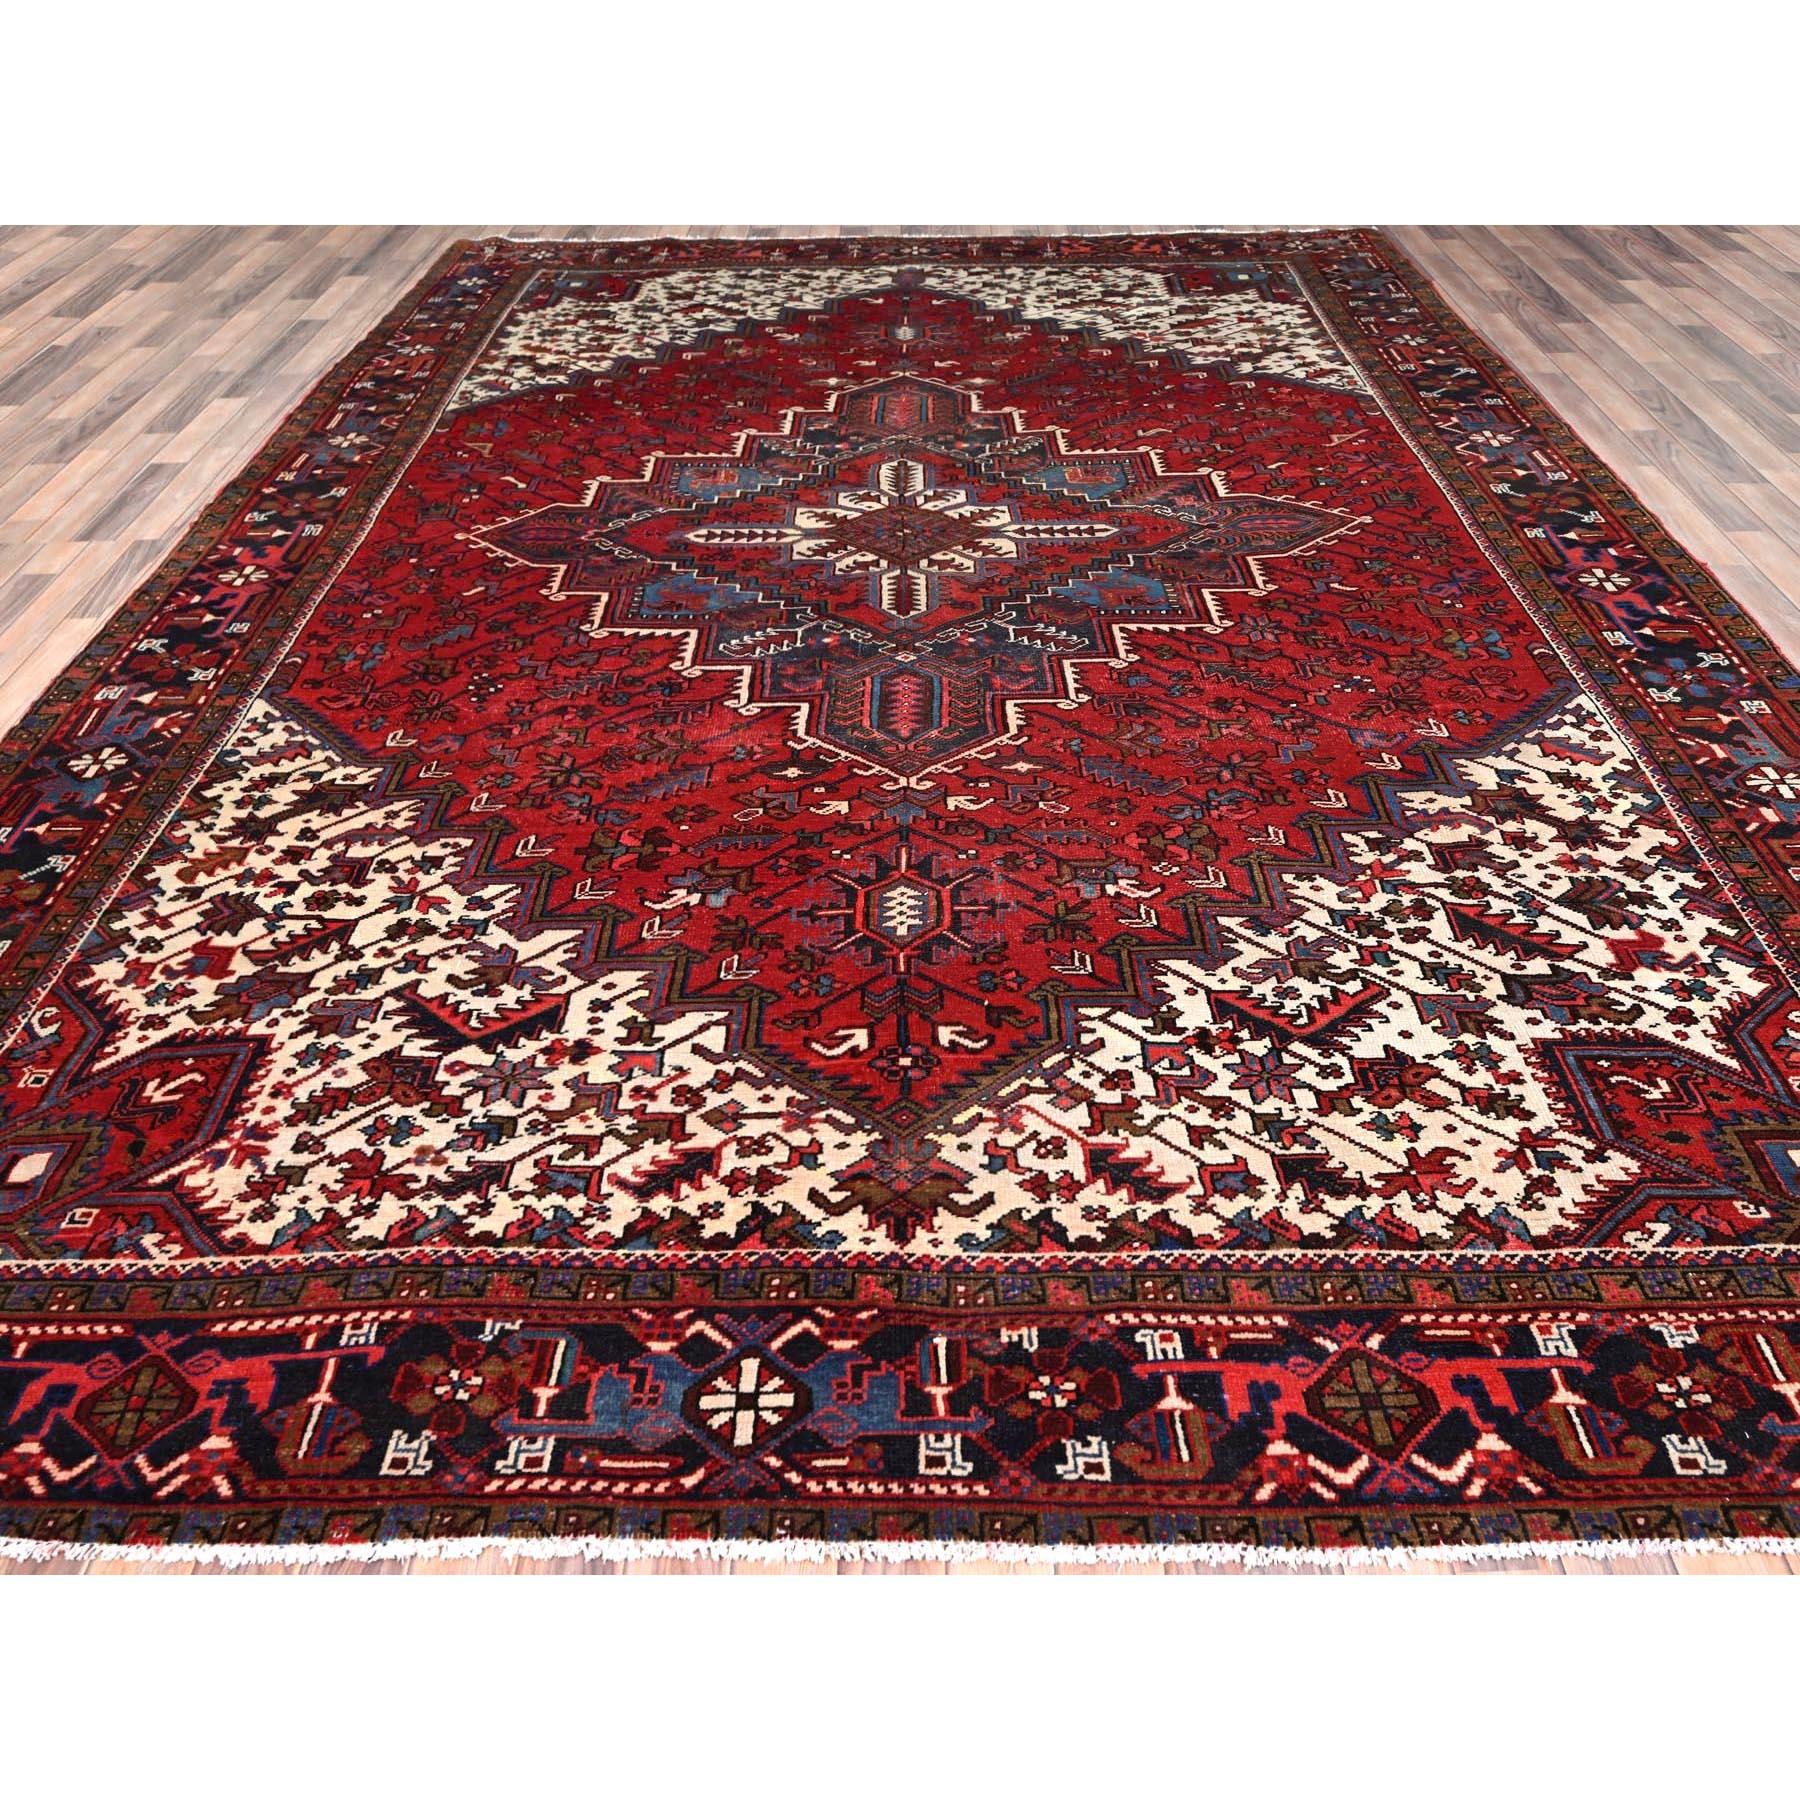 Heriz Serapi Imperial Red Semi Antique Persian Heriz Rustic Look Pure Wool Hand Knotted Rug For Sale